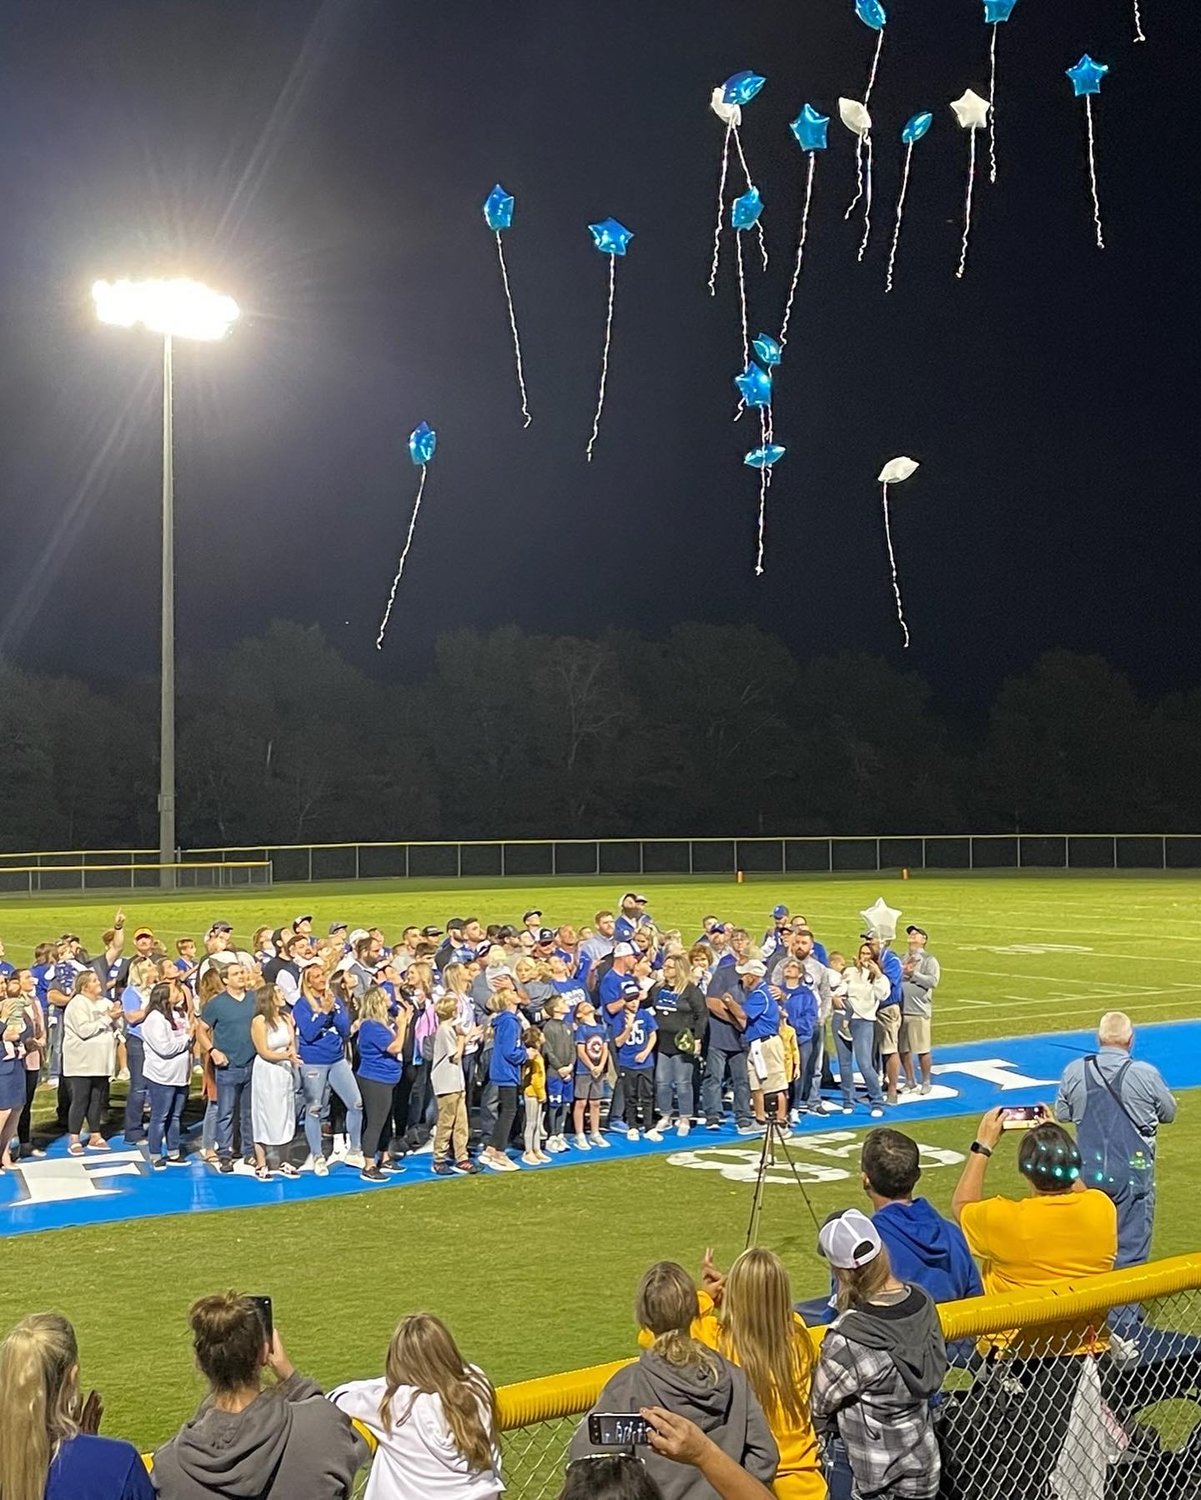 During the moment to honor Chad Franklin, the community released balloons in his honor.